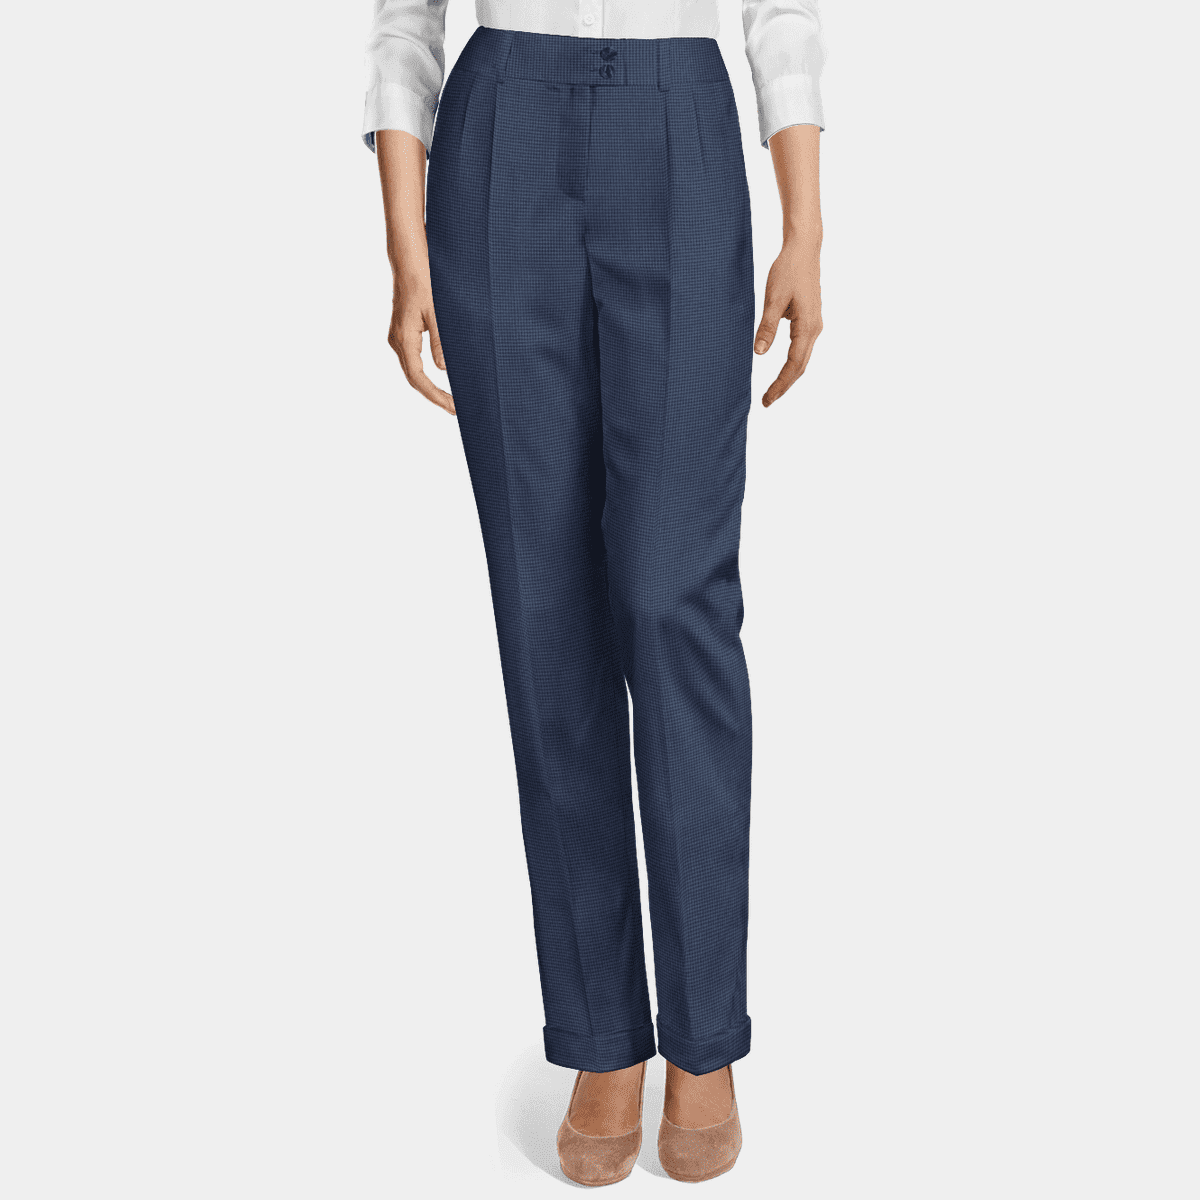 Stone wash blue houndstooth linen-cotton high waisted pleated cuffed ...